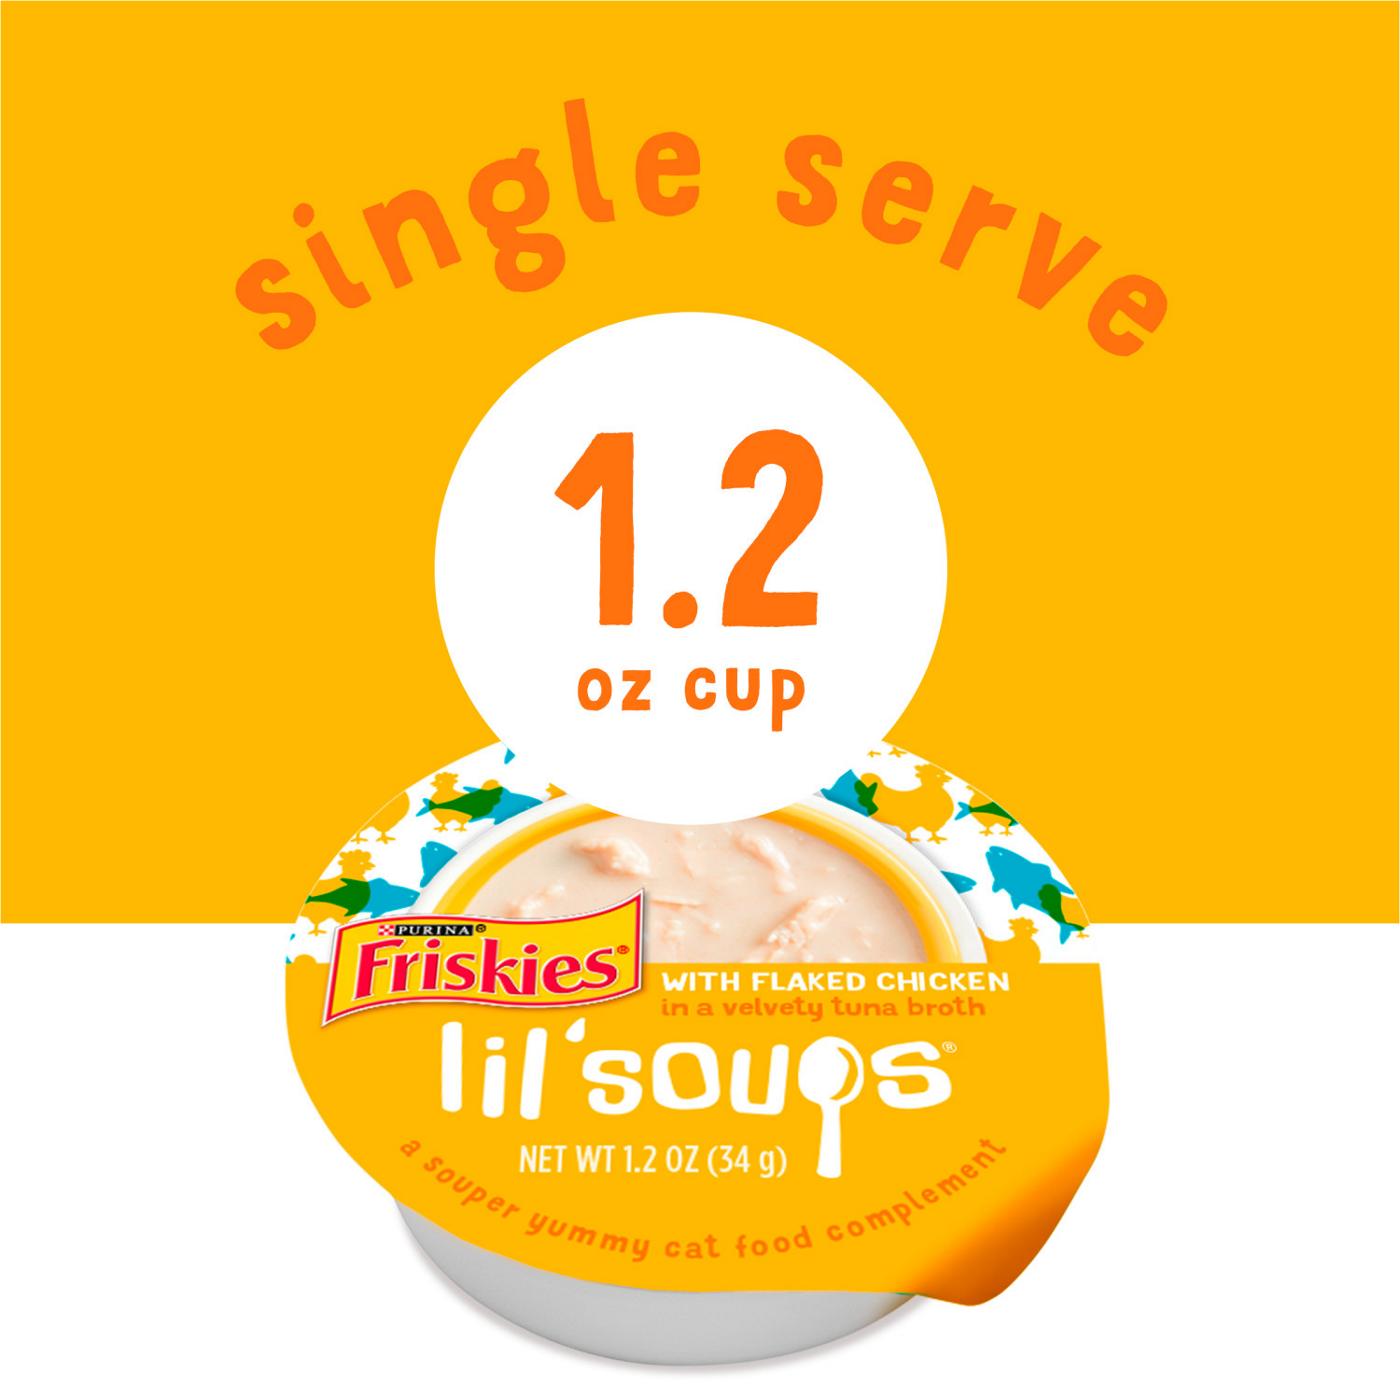 Friskies Purina Friskies Natural, Grain Free Wet Cat Food Lickable Cat Treats, Lil' Soups Flaked Chicken; image 5 of 5